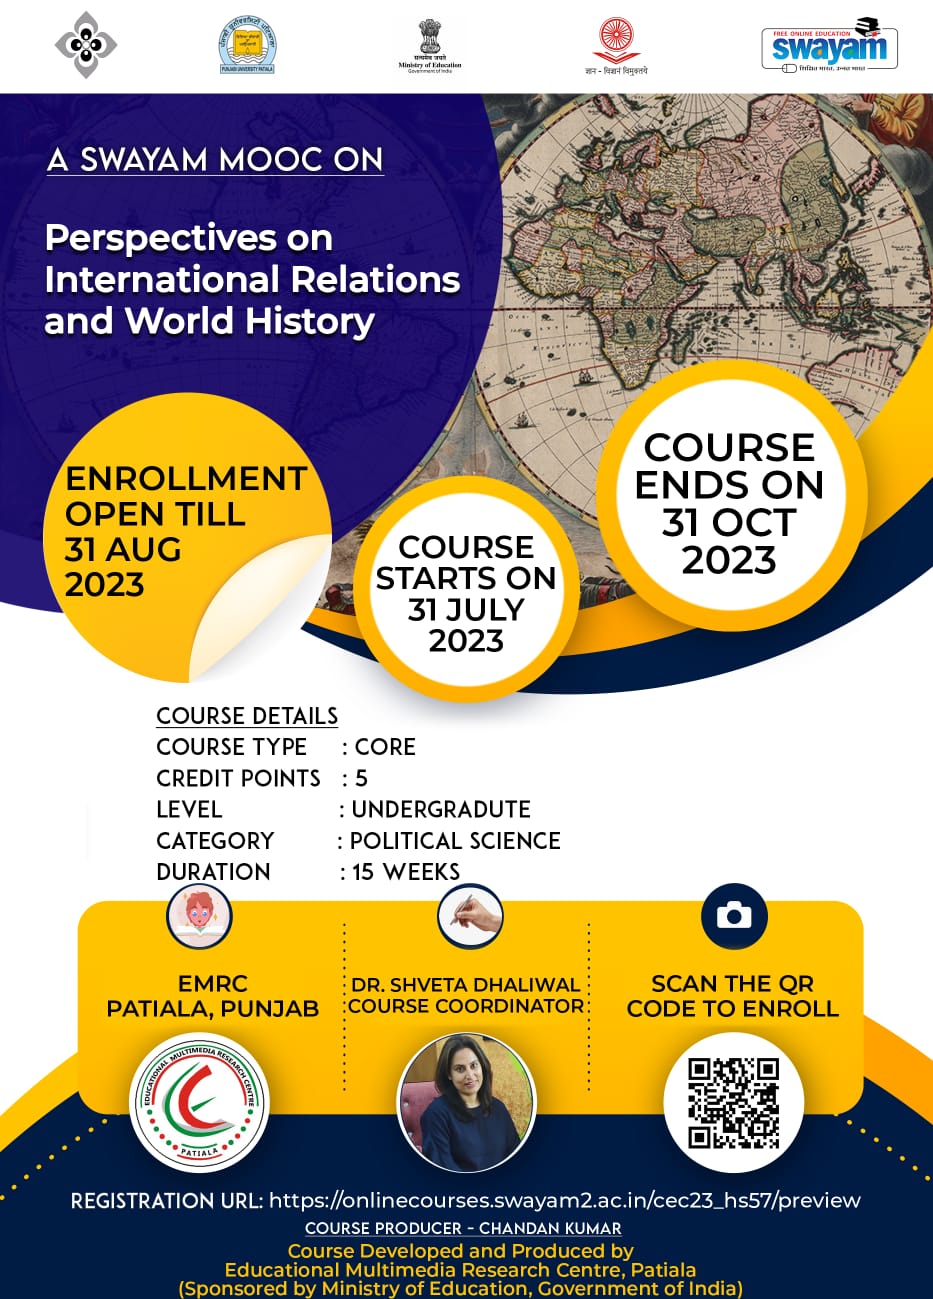 Upcoming Course on Perspectives on International Relations & World History